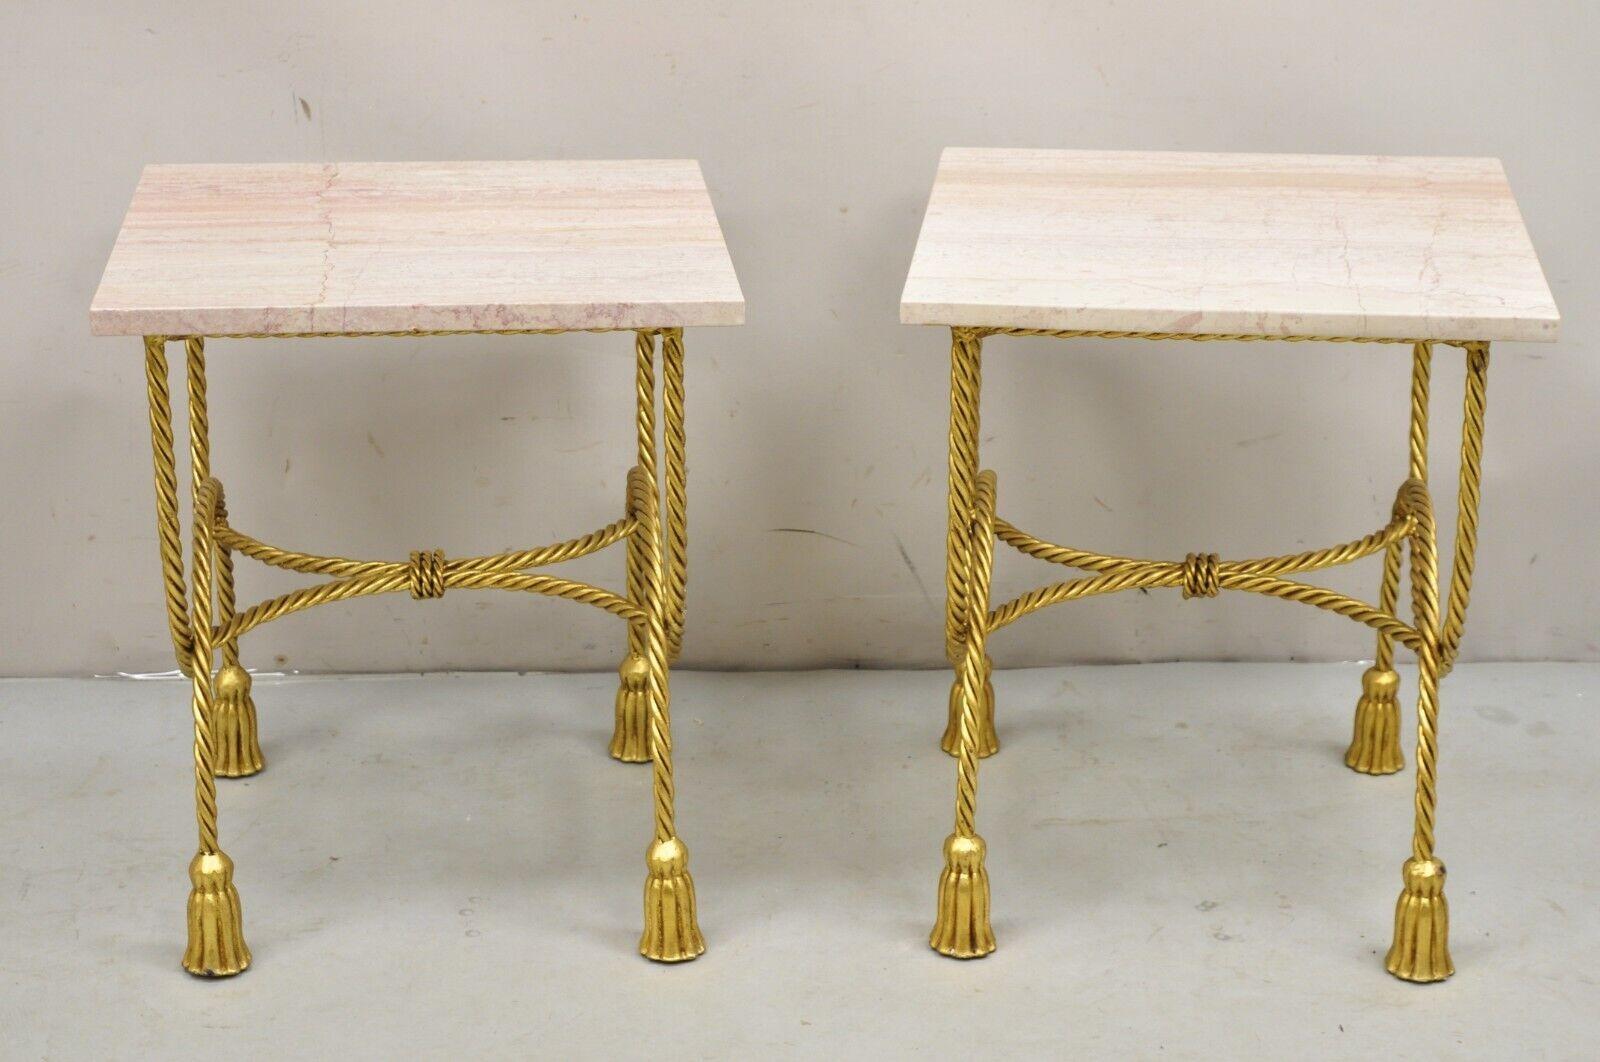 Italian Hollywood Regency Gold Gilt Iron Rope Tassel Pink Marble Top Side Tables - a Pair. Item features Marble tops, tassel form feet, iron metal scrolling rope design frame, gold leaf gilt finish, very nice vintage side tables, quality Italian